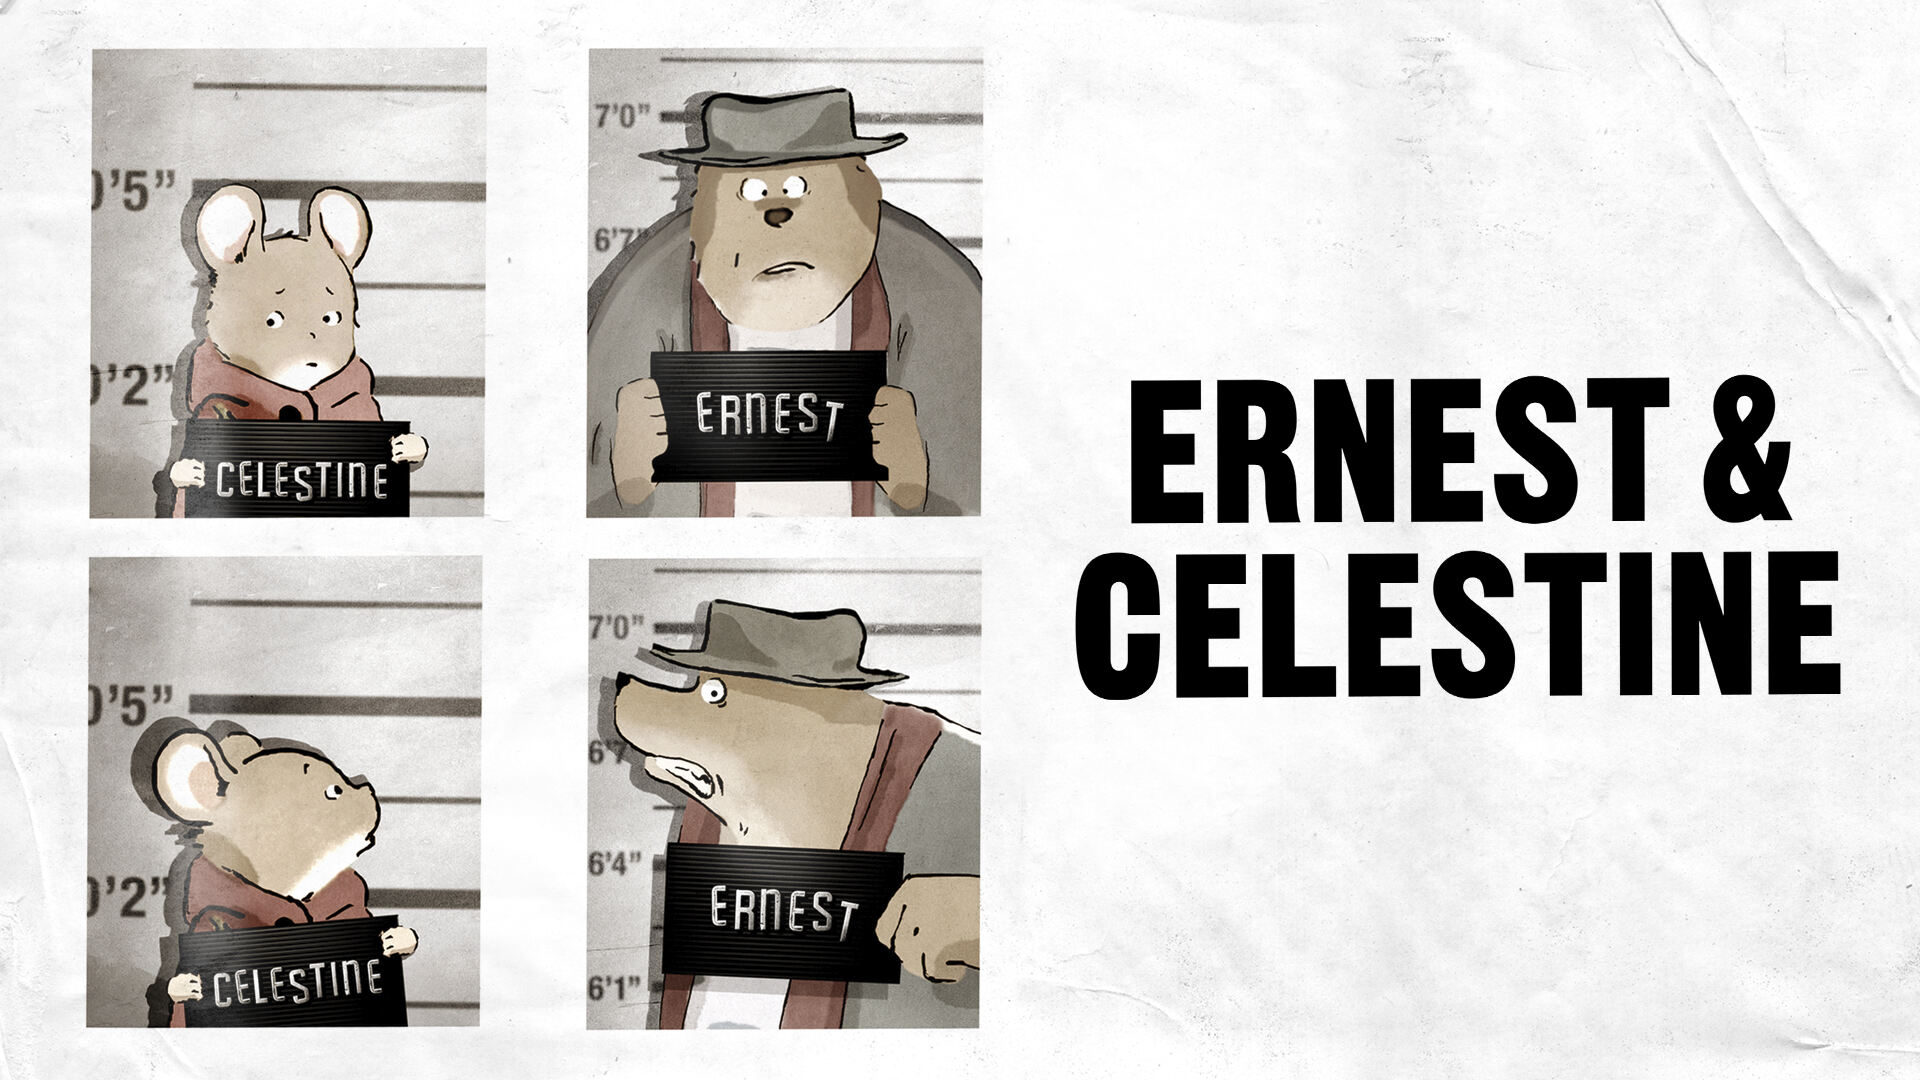 46-facts-about-the-movie-ernest-celestine